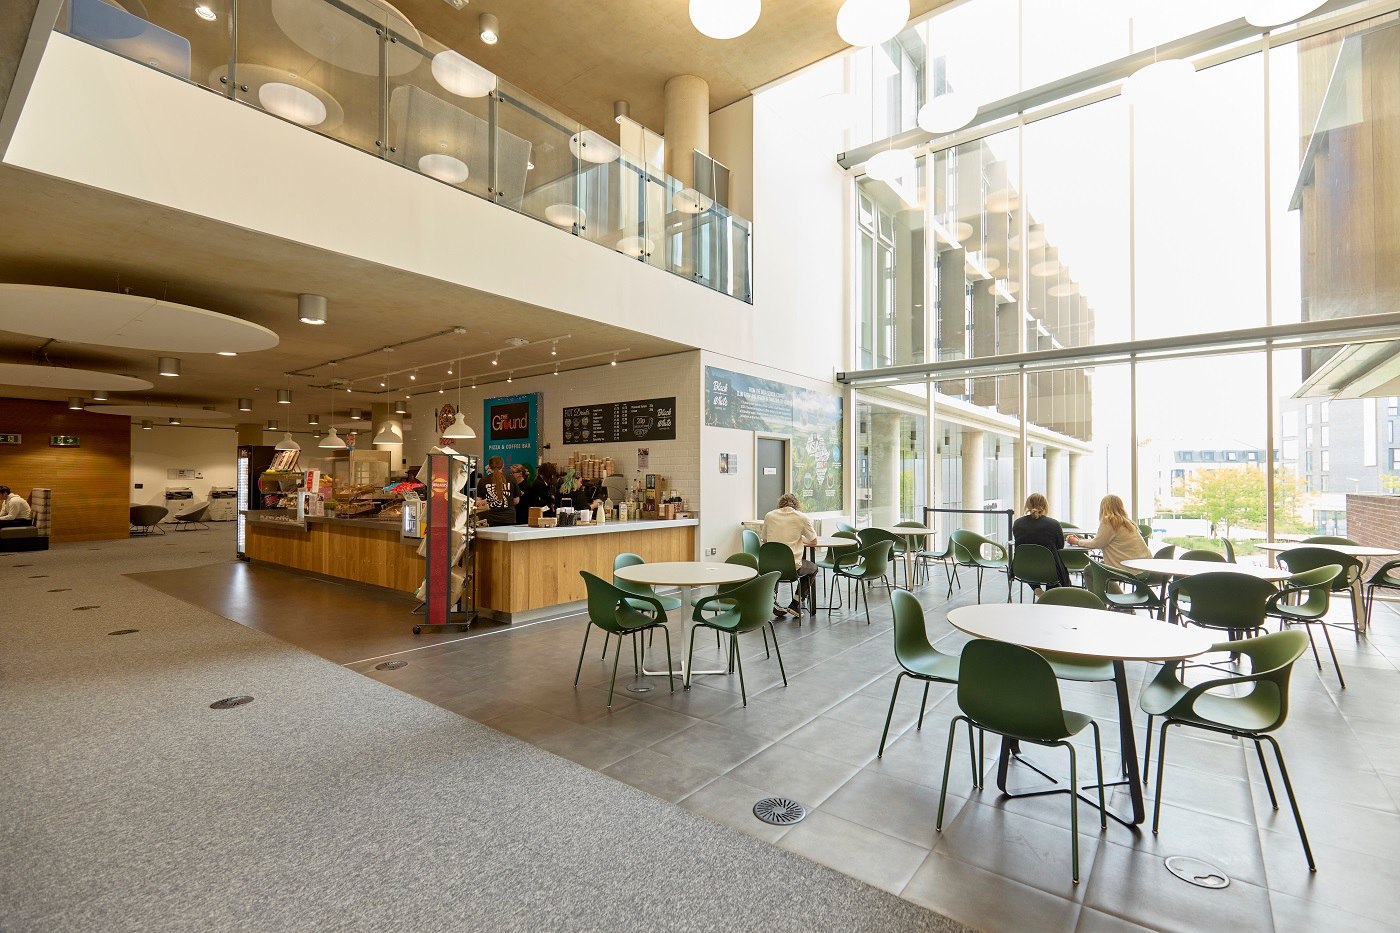 The Ground Cafe in the Learning Hub